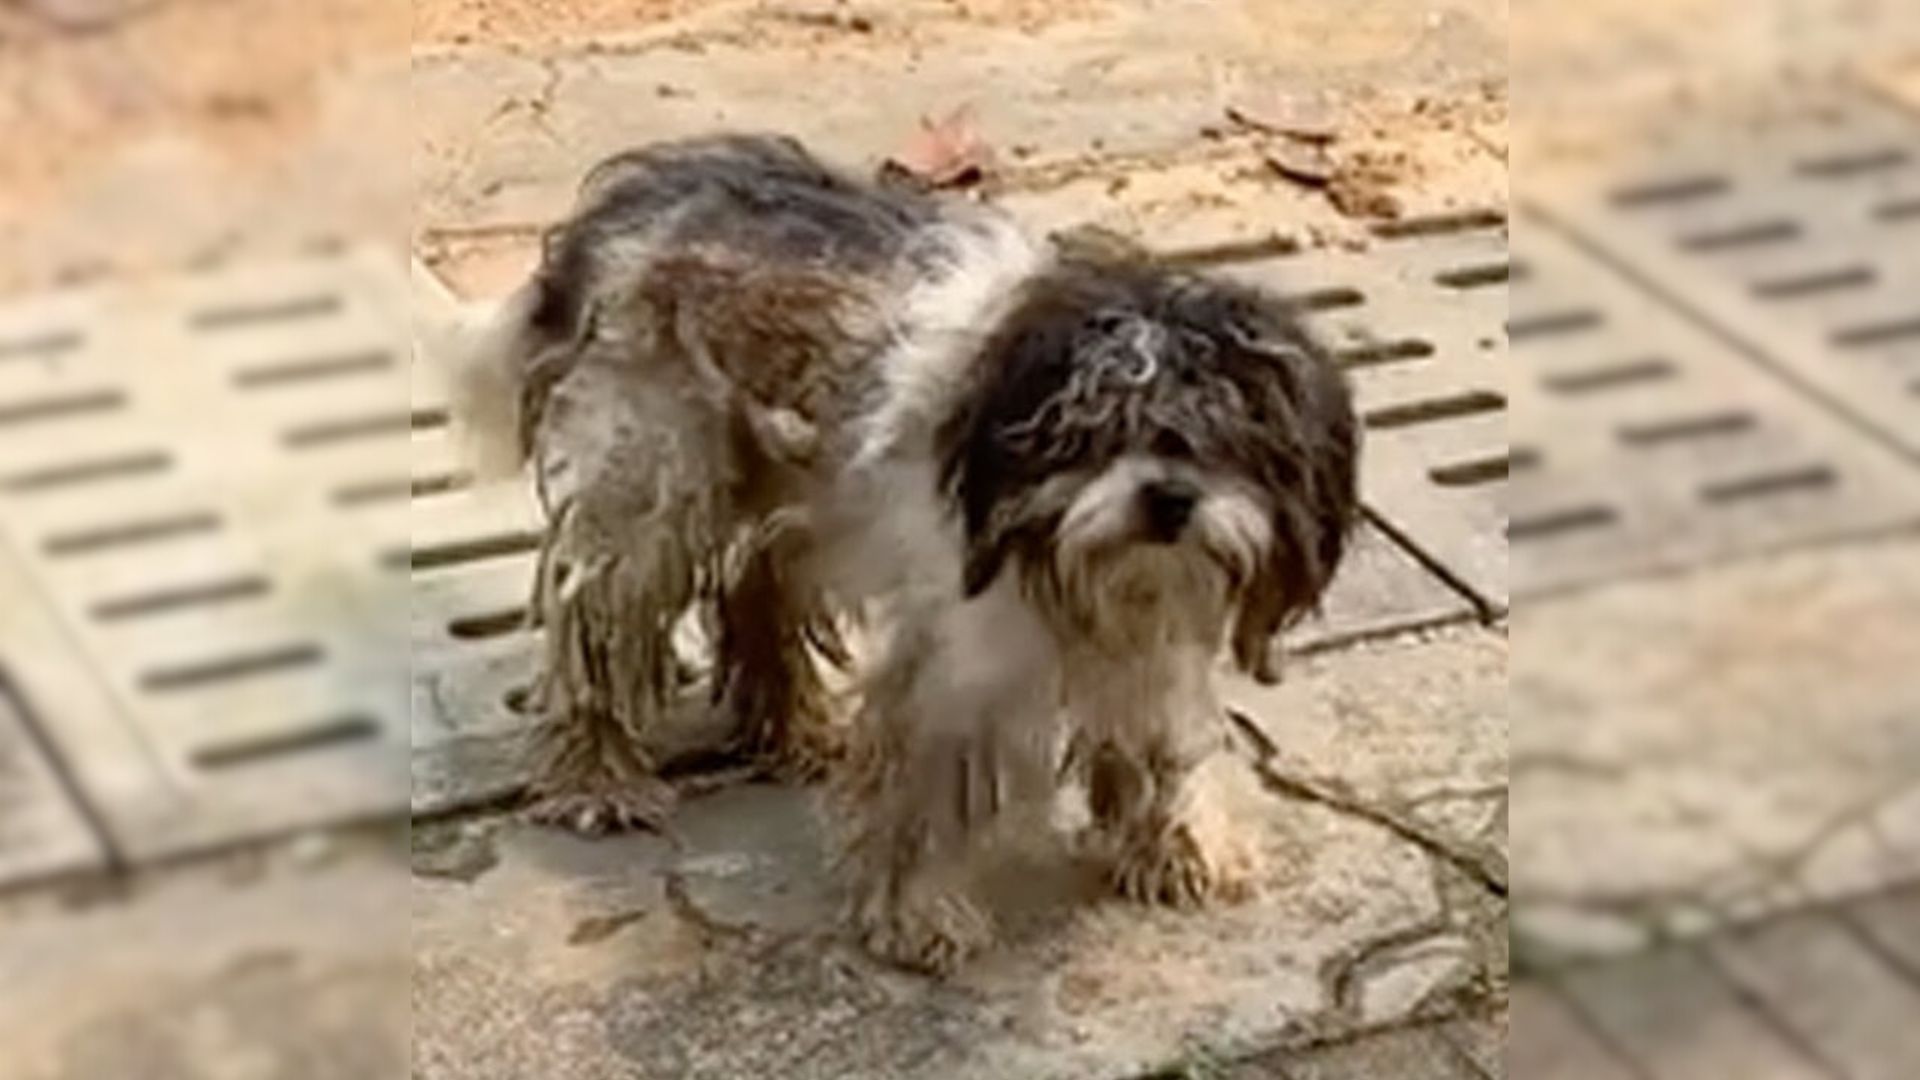 Abandoned Dog Endures Months Of Neglect Covered In Mud In Harsh Conditions